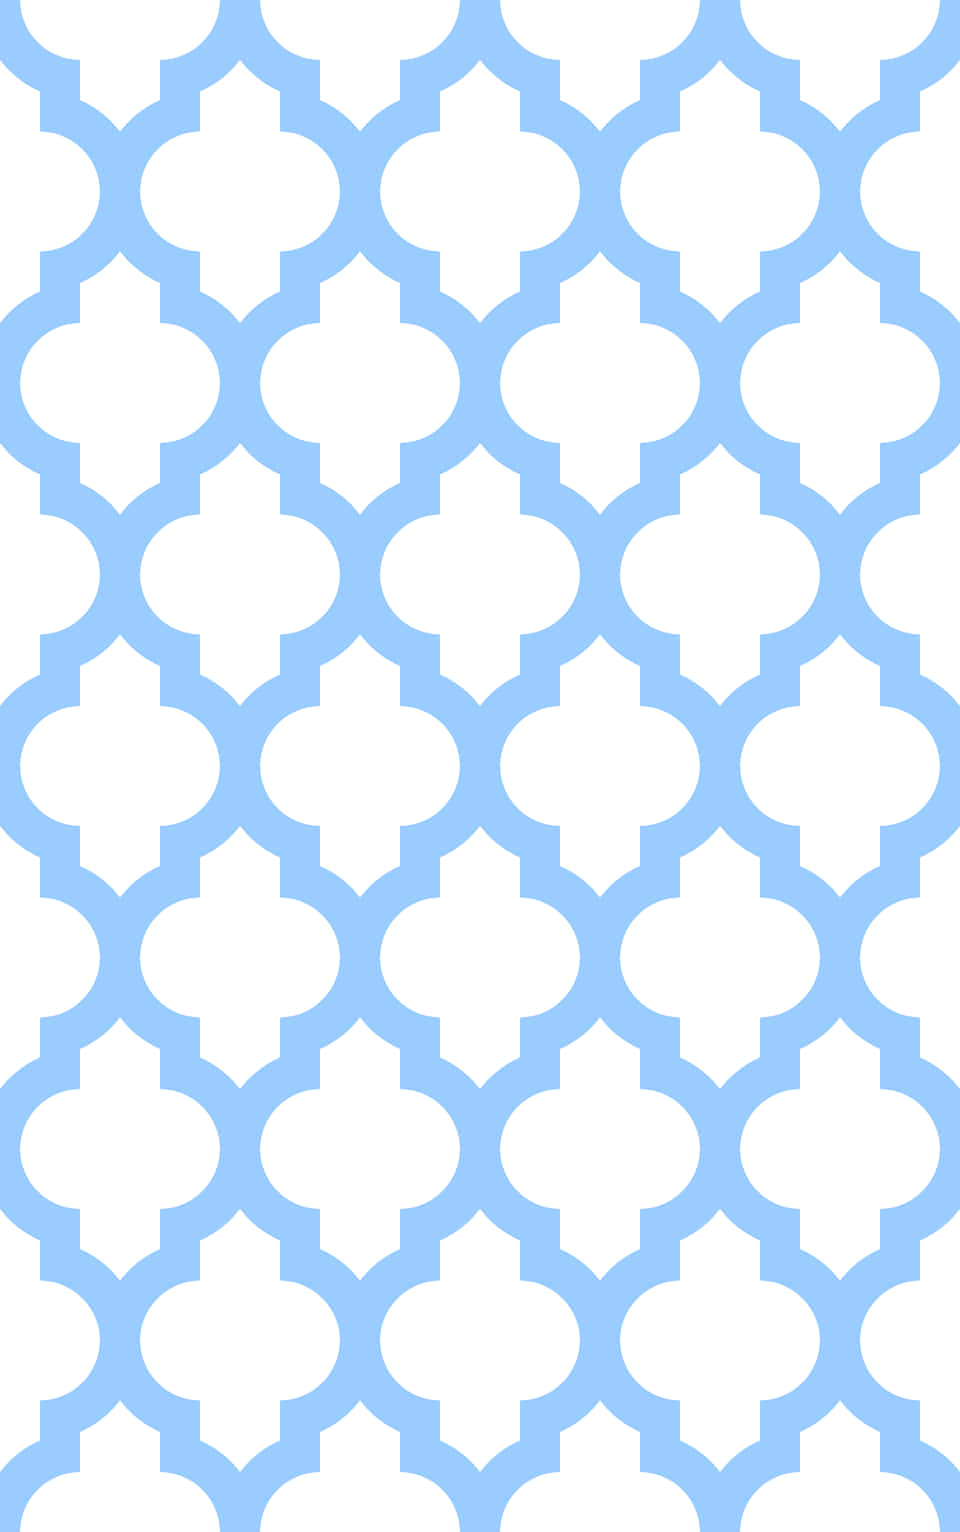 A calming blue and white patterned background